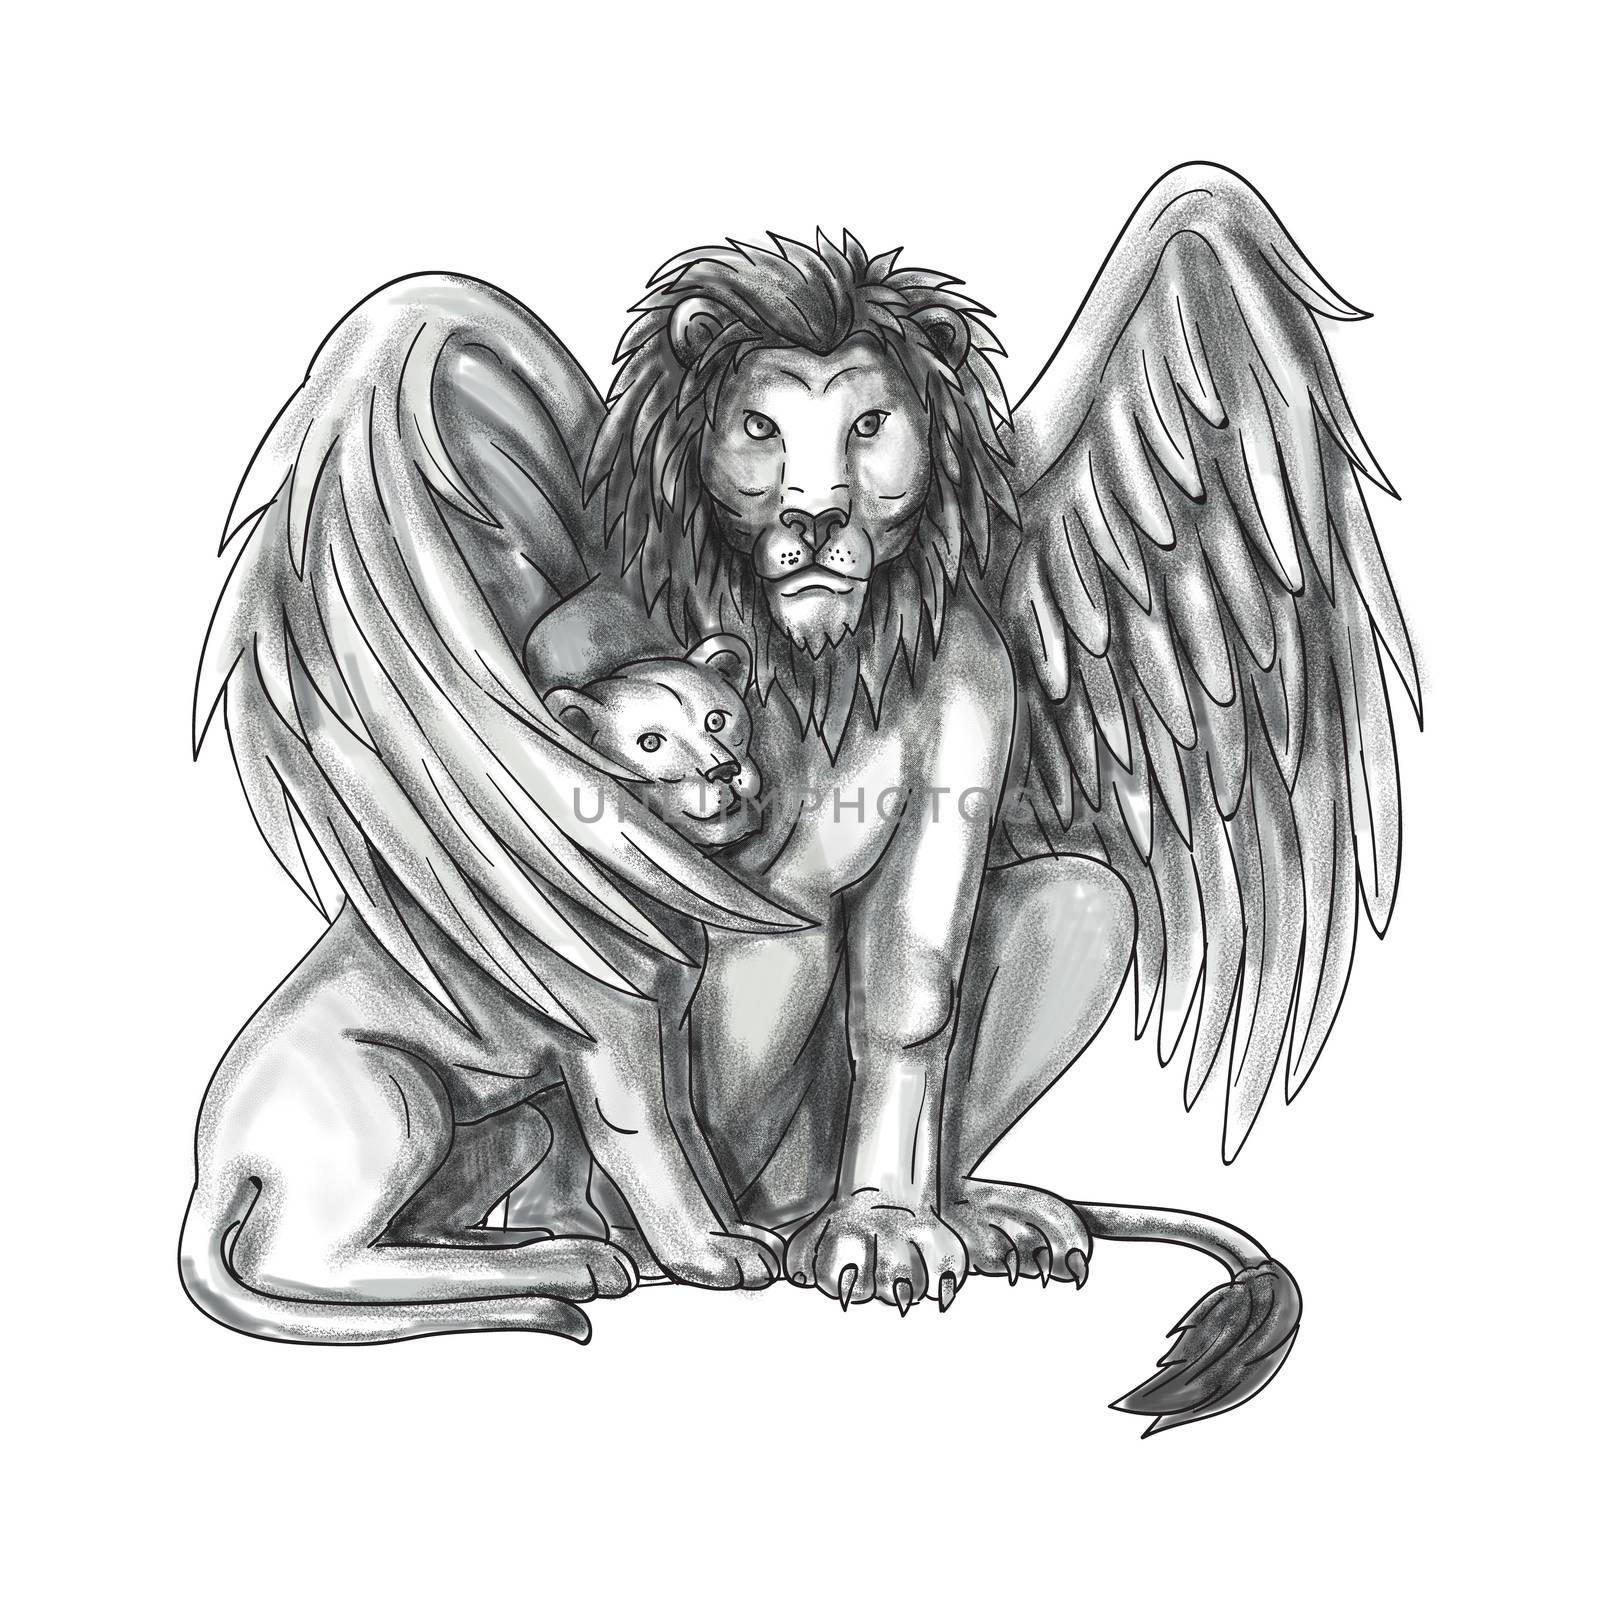 Tattoo style illustration of a winged lion, a mythological creature that resembles a lion with bird-like wings, protecting its cub by putting it under it's wing set on isolated white background viewed from front. 